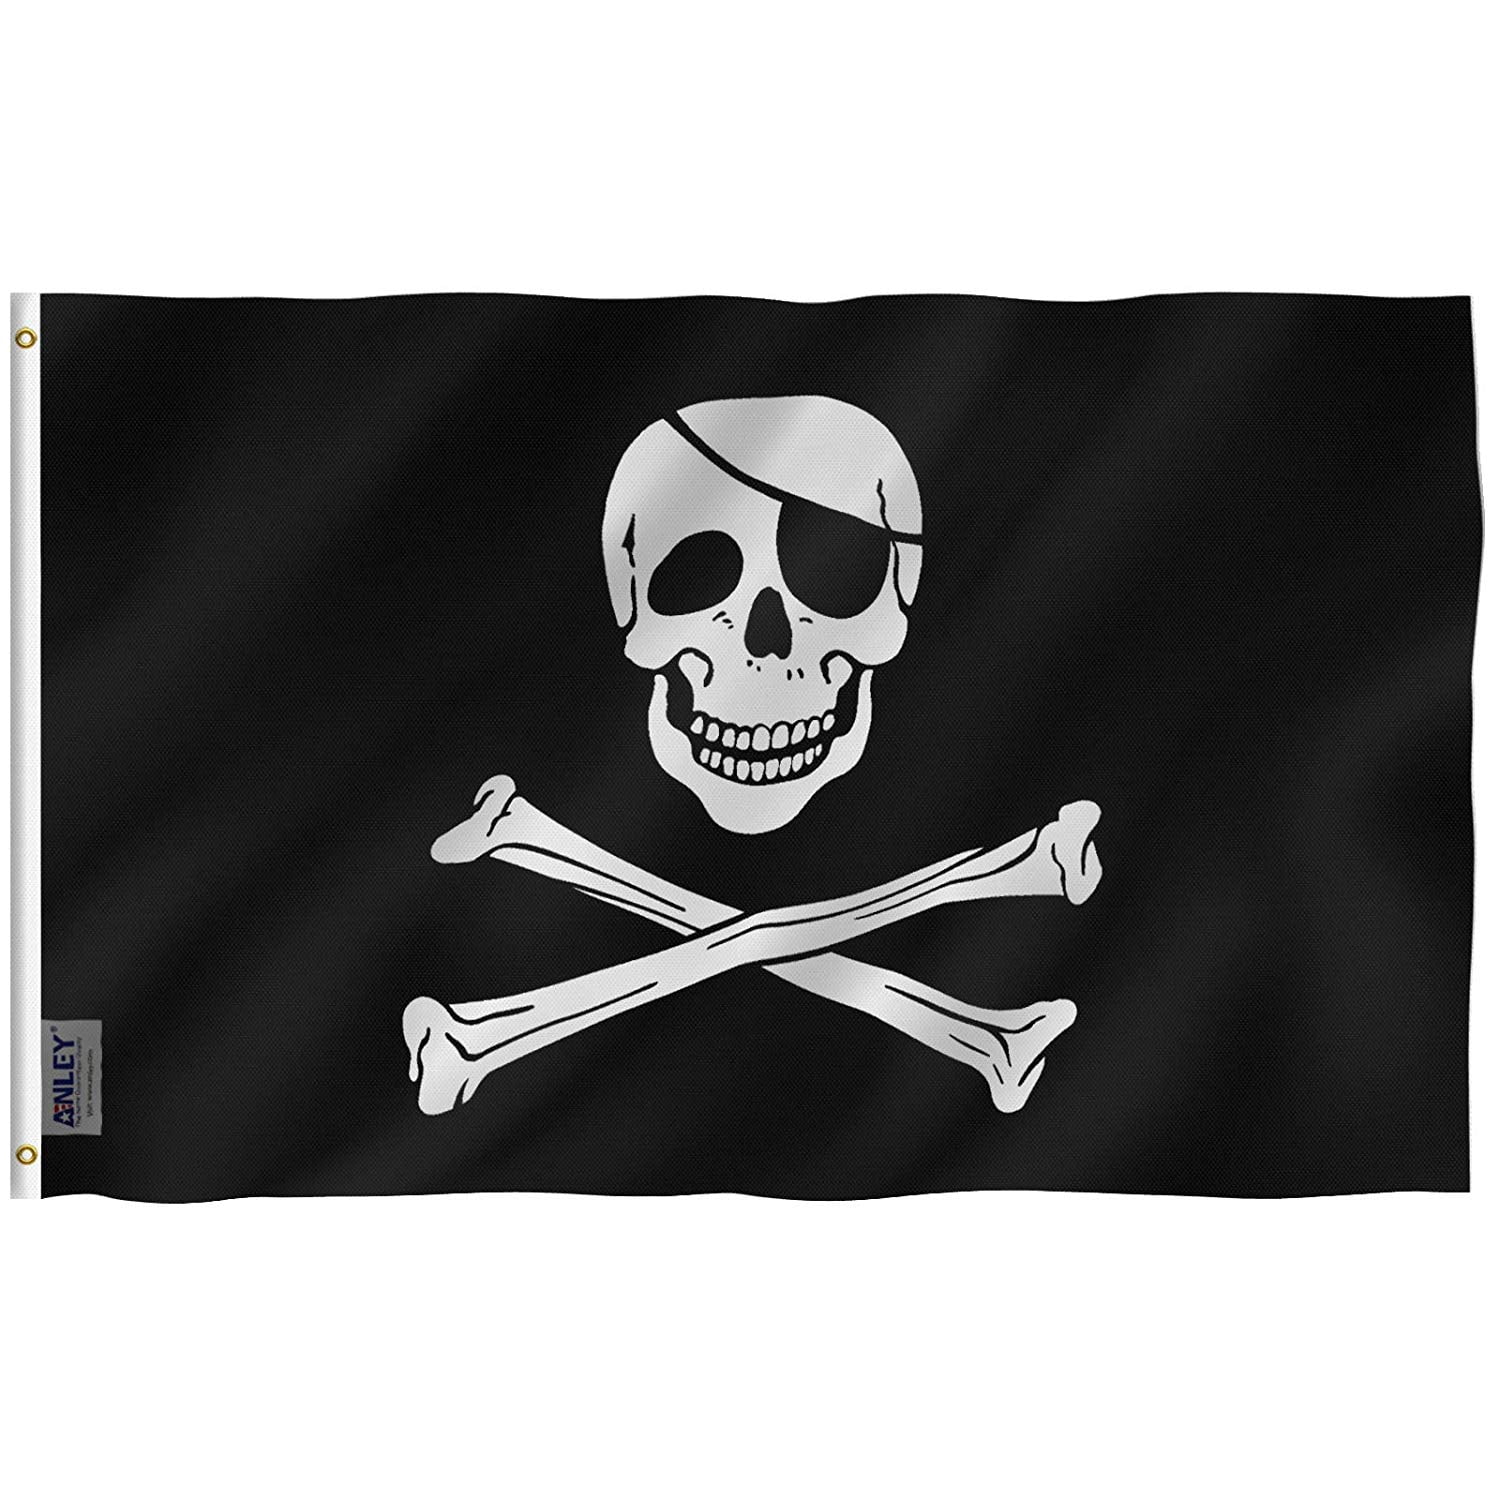 RUF 3x5 Pirate Red Eyes 3'x5' Premium Quality Heavy Duty 100D Polyester Flag